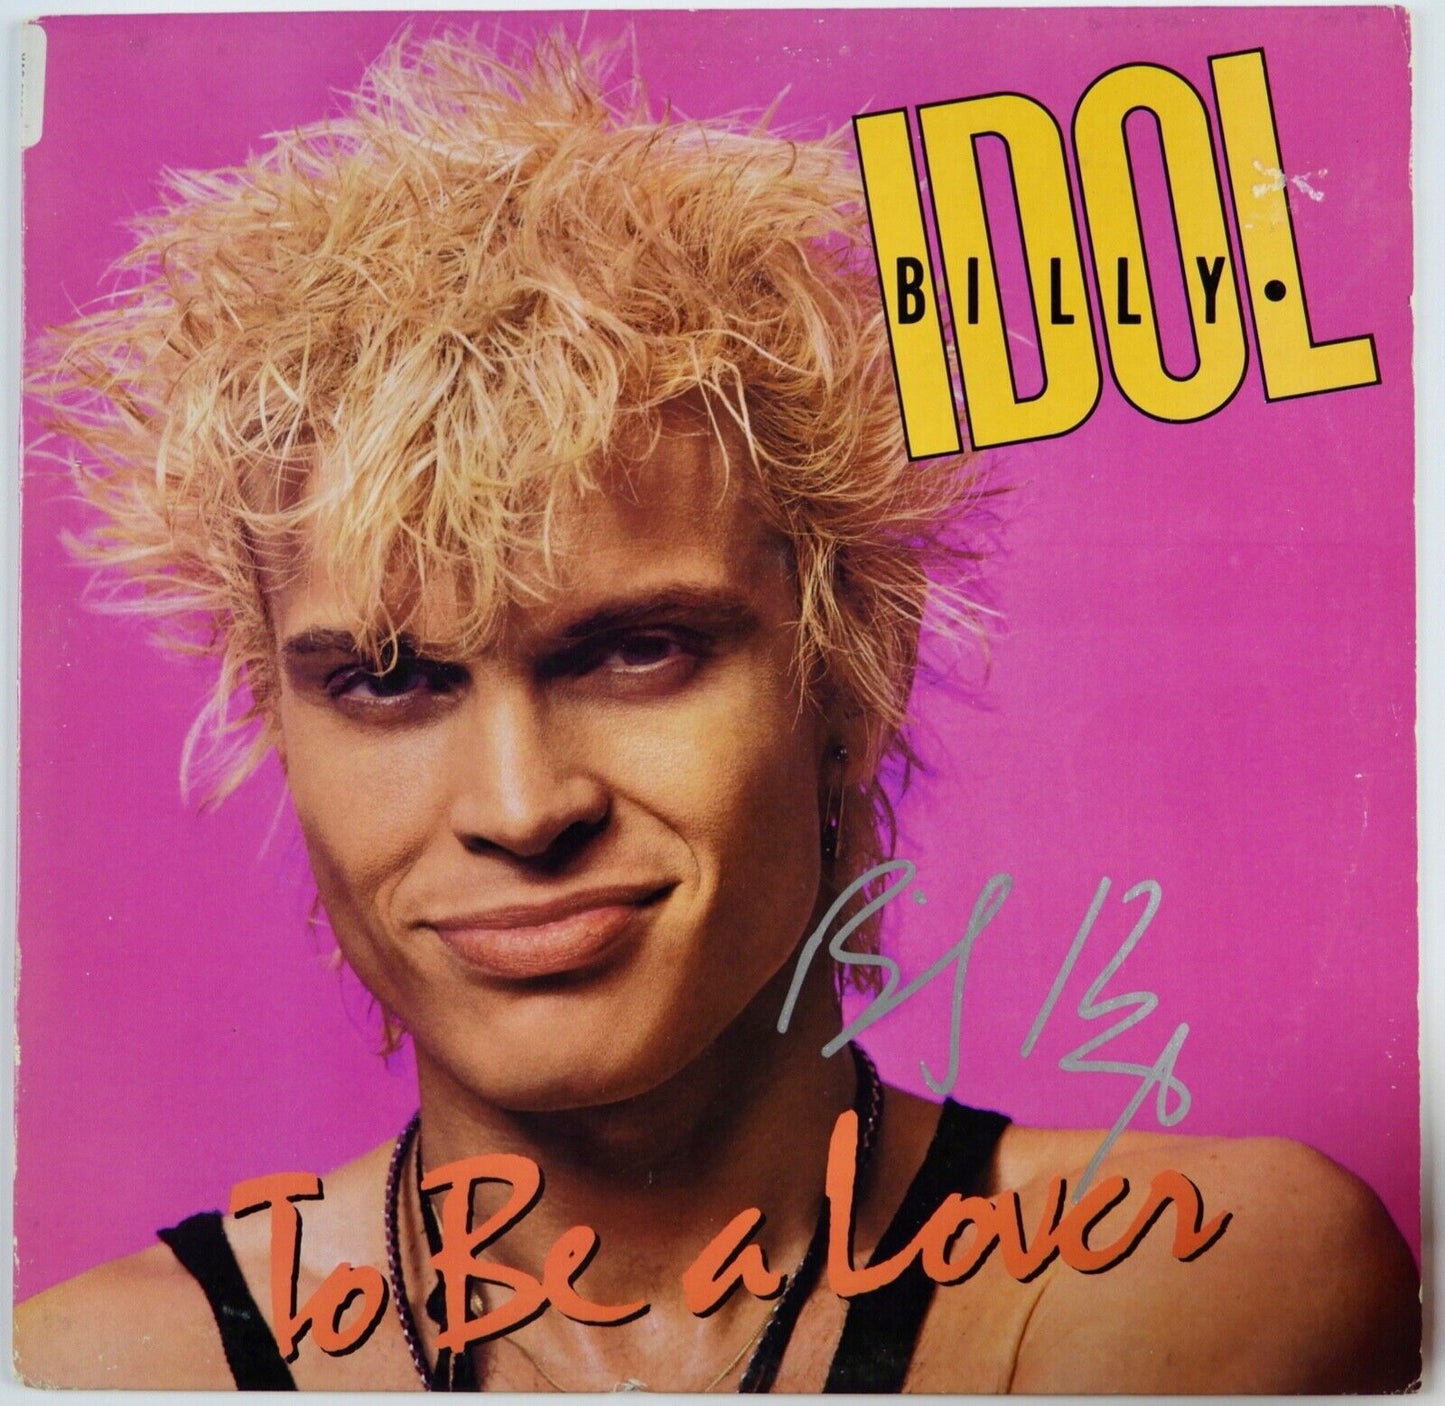 Billy Idol Signed JSA Autograph Album To Be A Lover